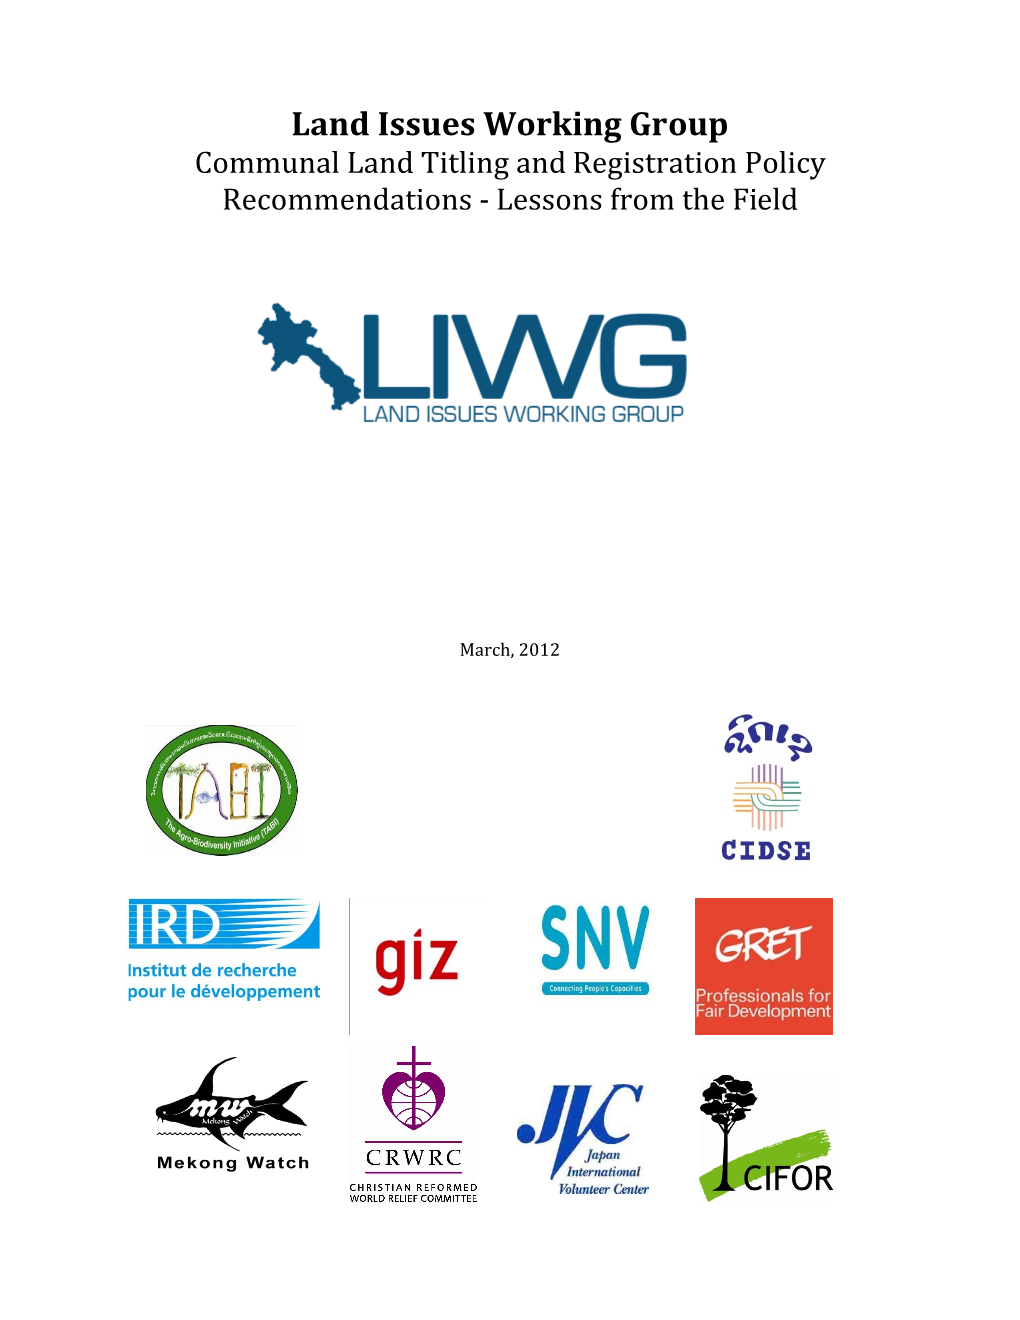 Land Issues Working Group Communal Land Titling and Registration Policy Recommendations - Lessons from the Field